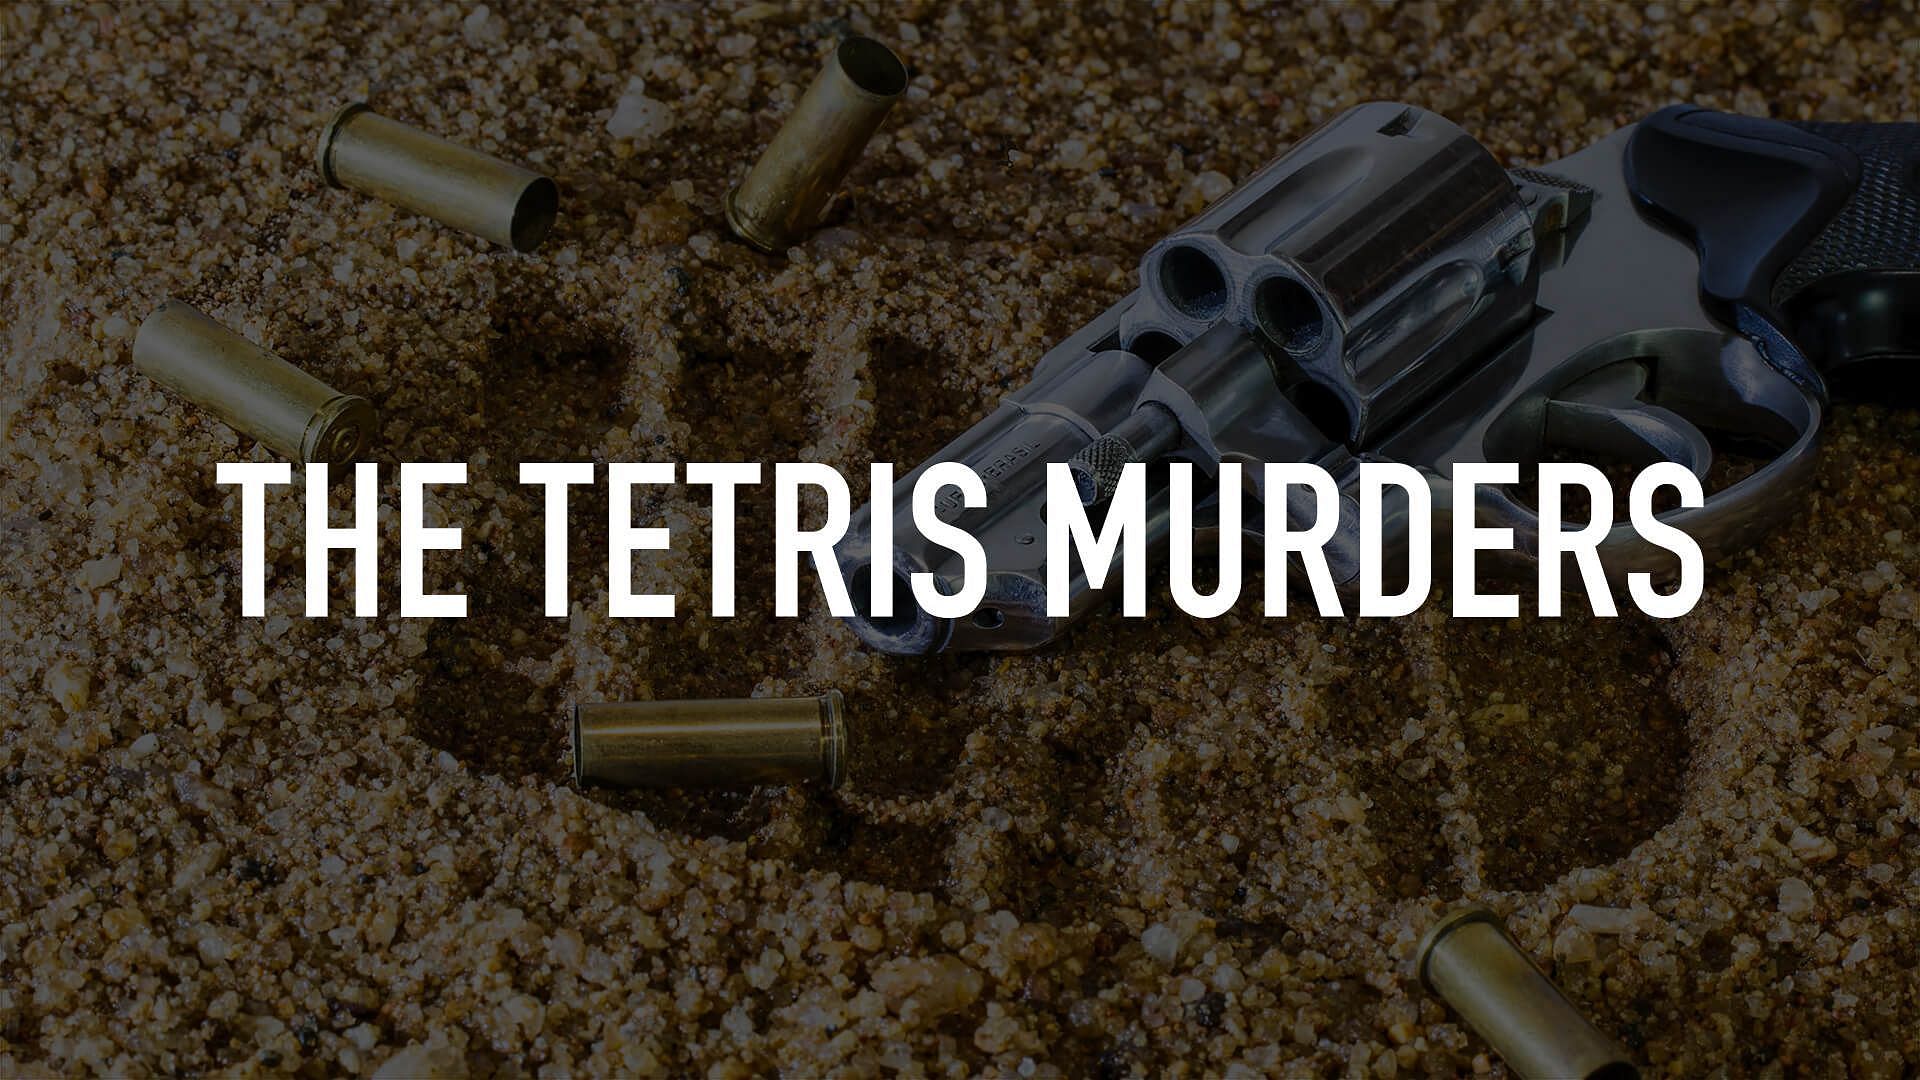 A poster for The Tetris Murders (Image via ID)